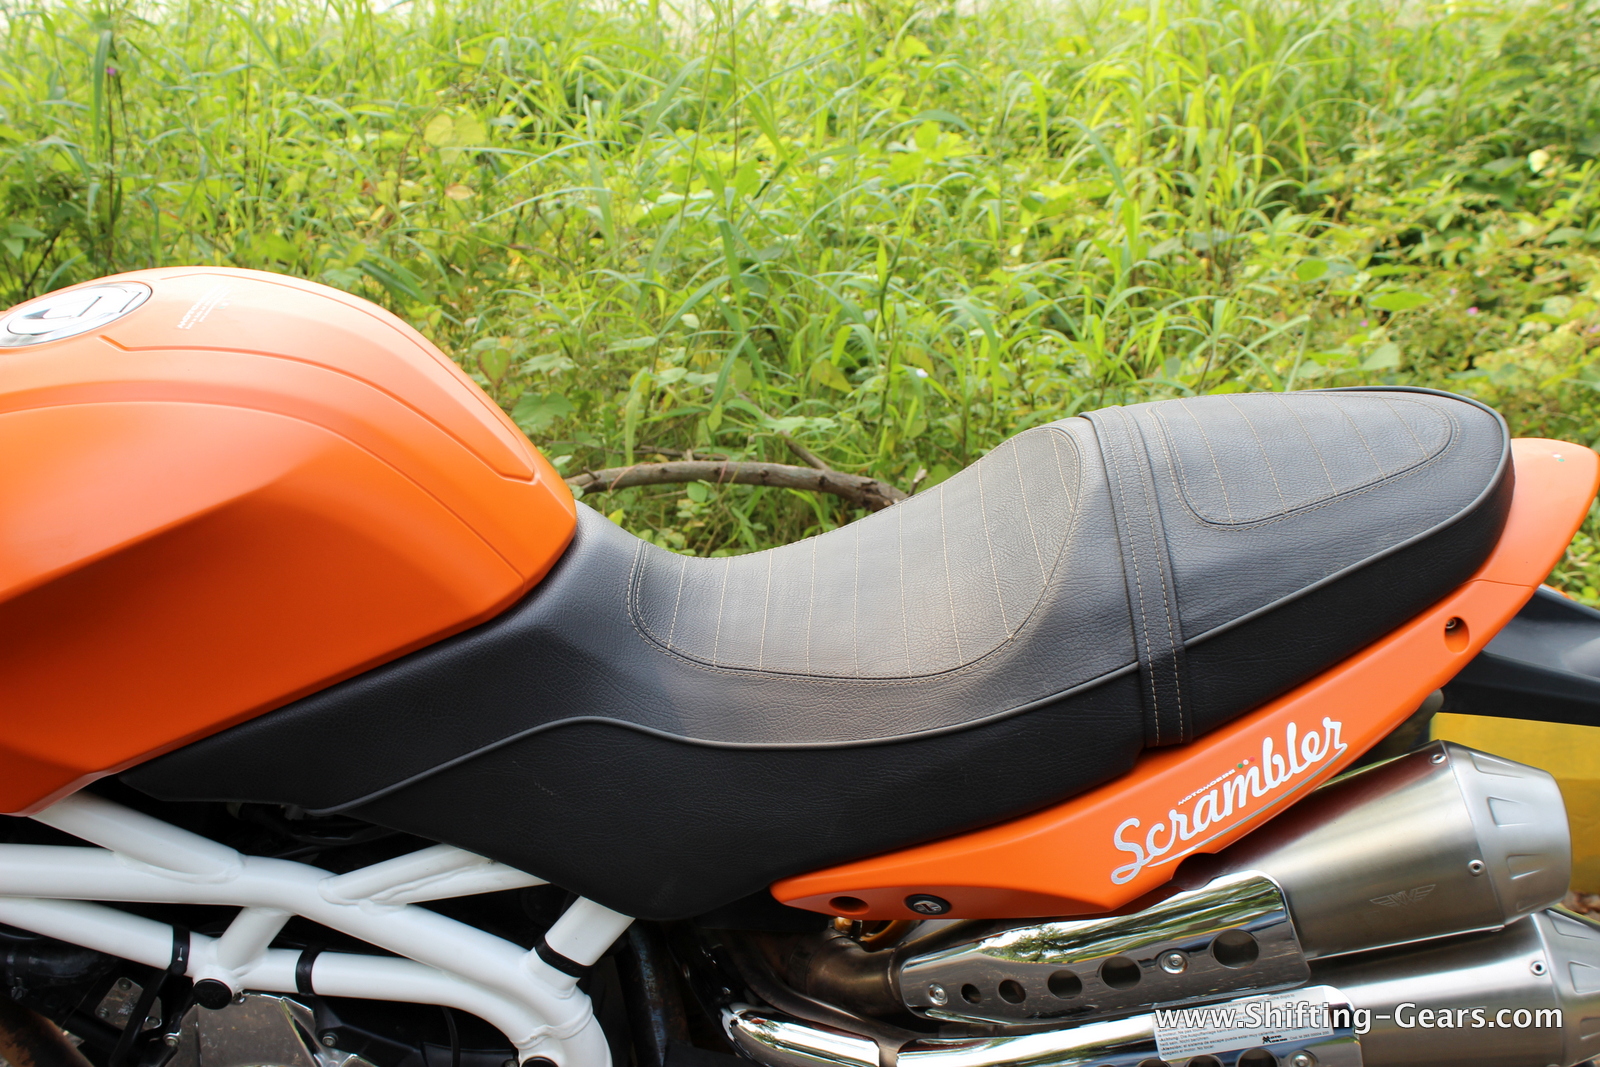 Well contoured seats have ample room even for the heavier rider